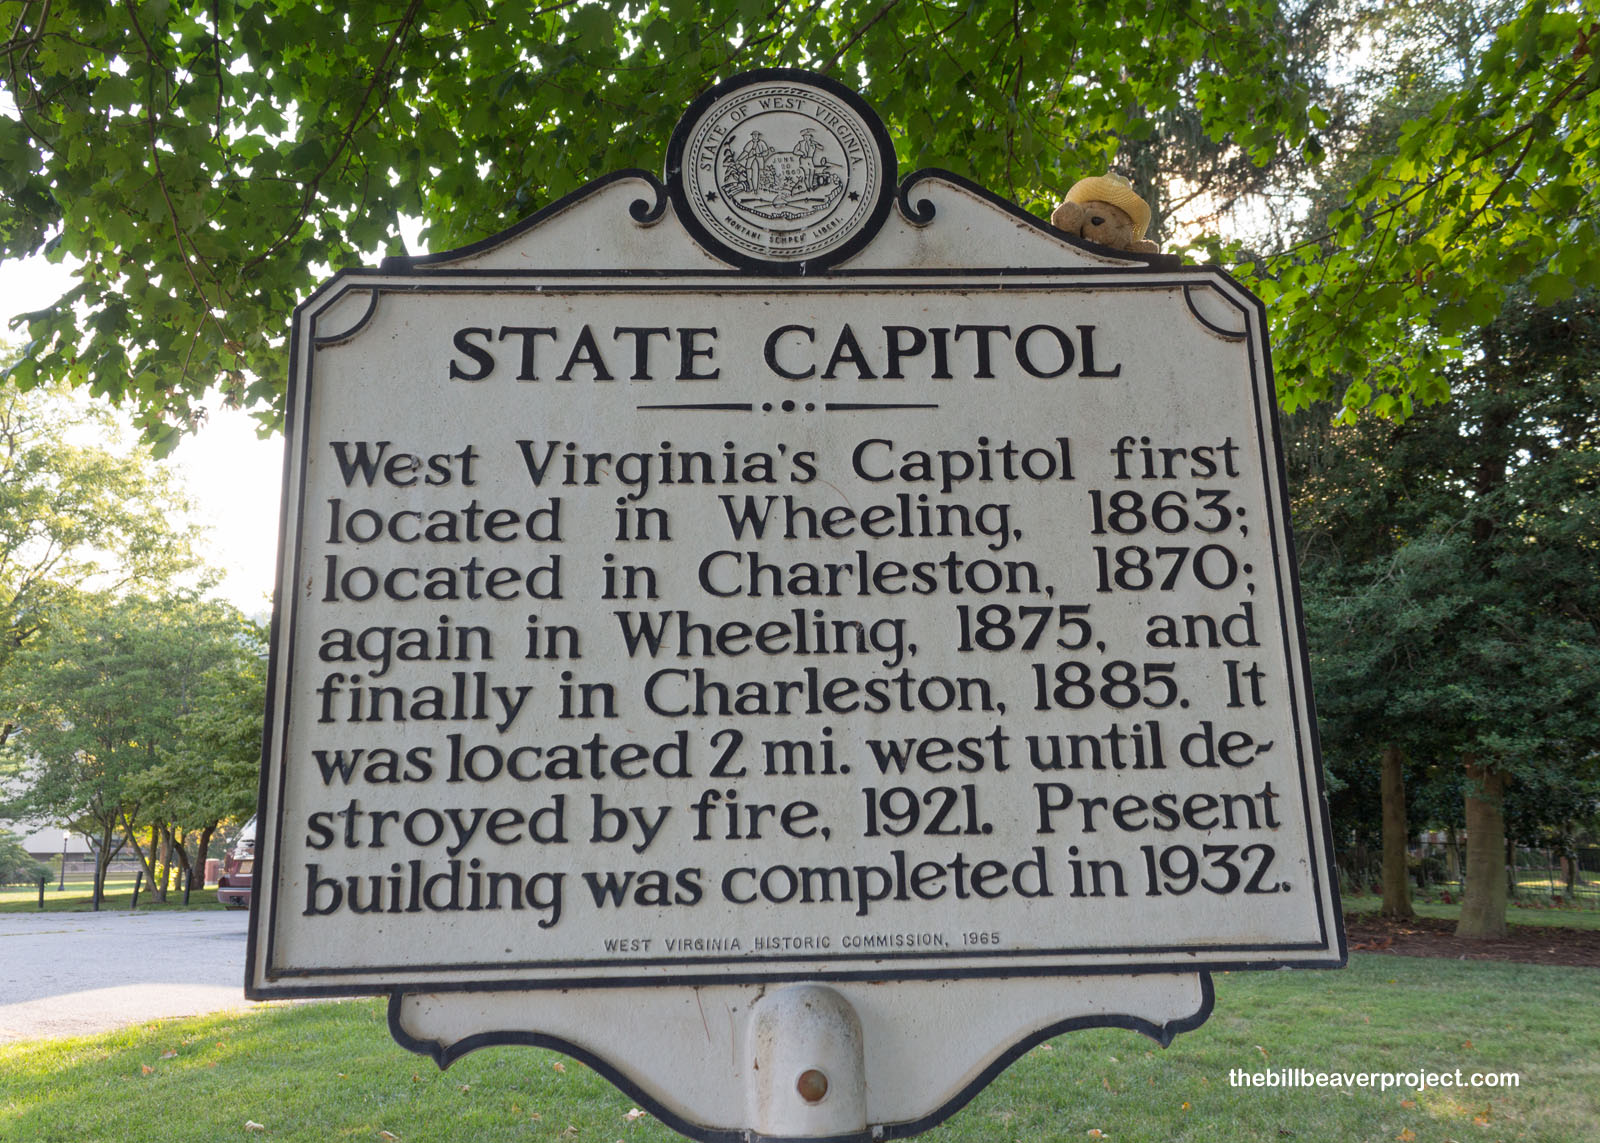 The West Virginia State Capitol